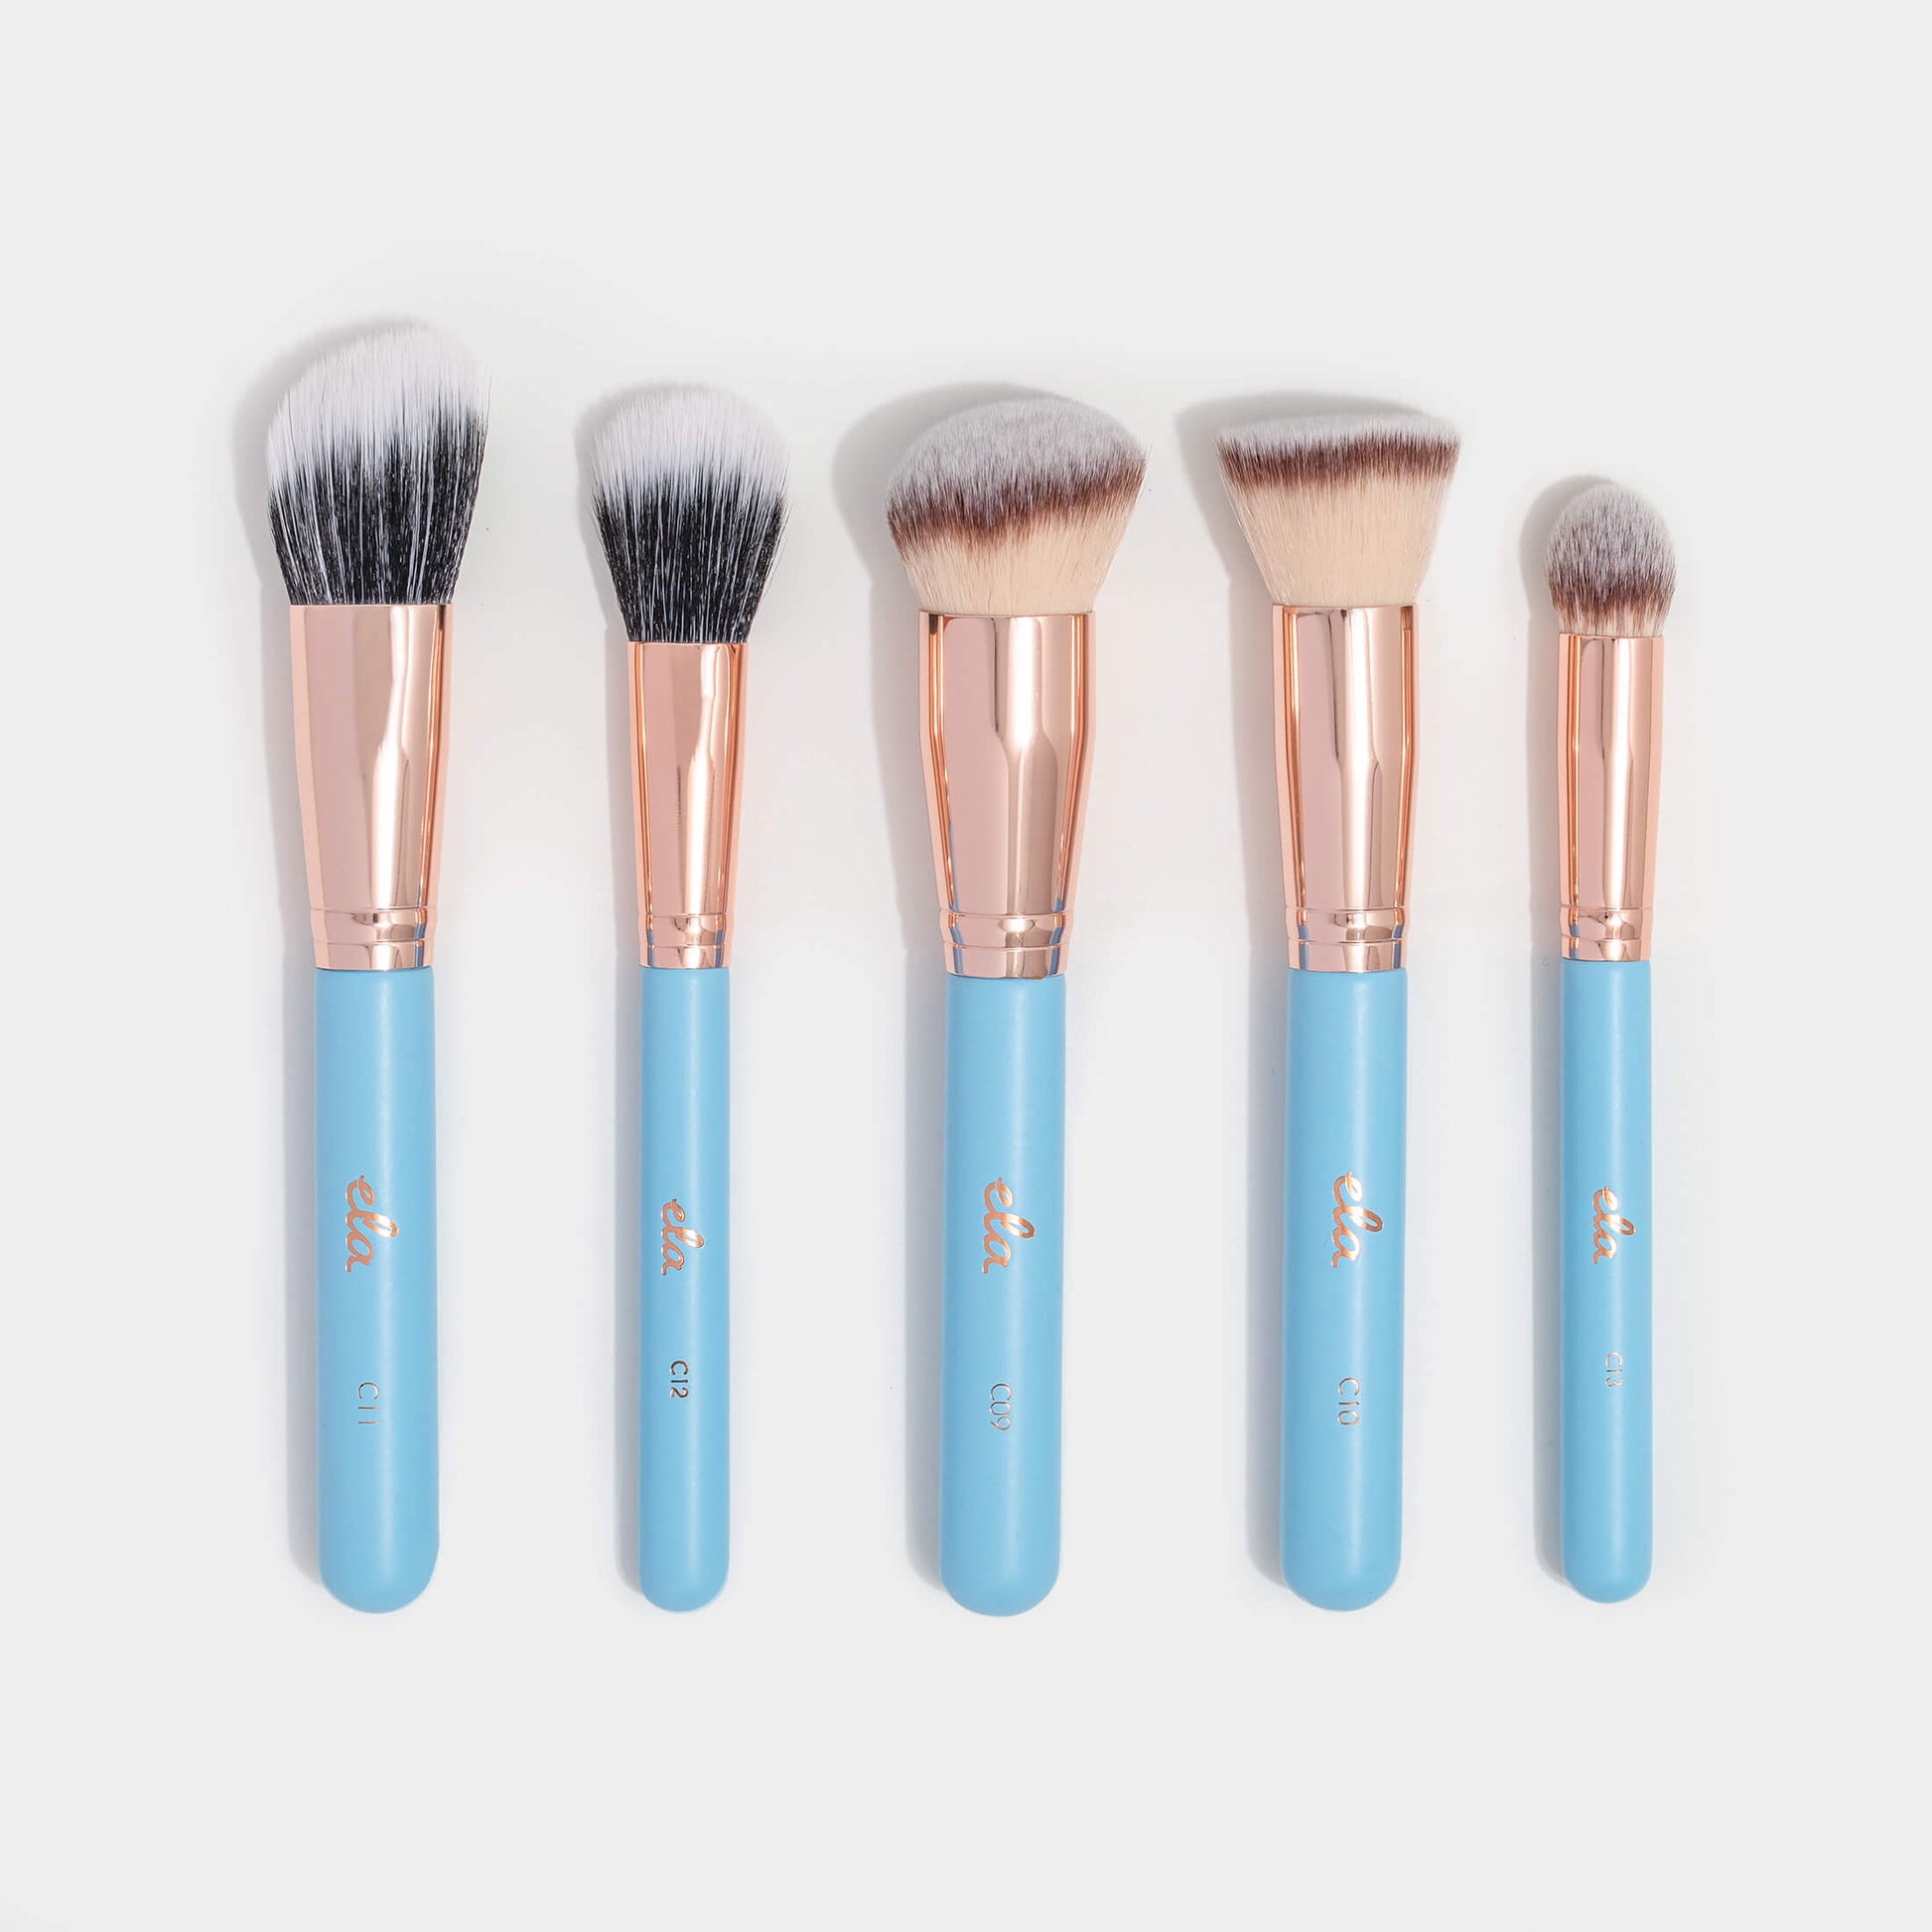 five baby blue brushes designed for liquids and creams